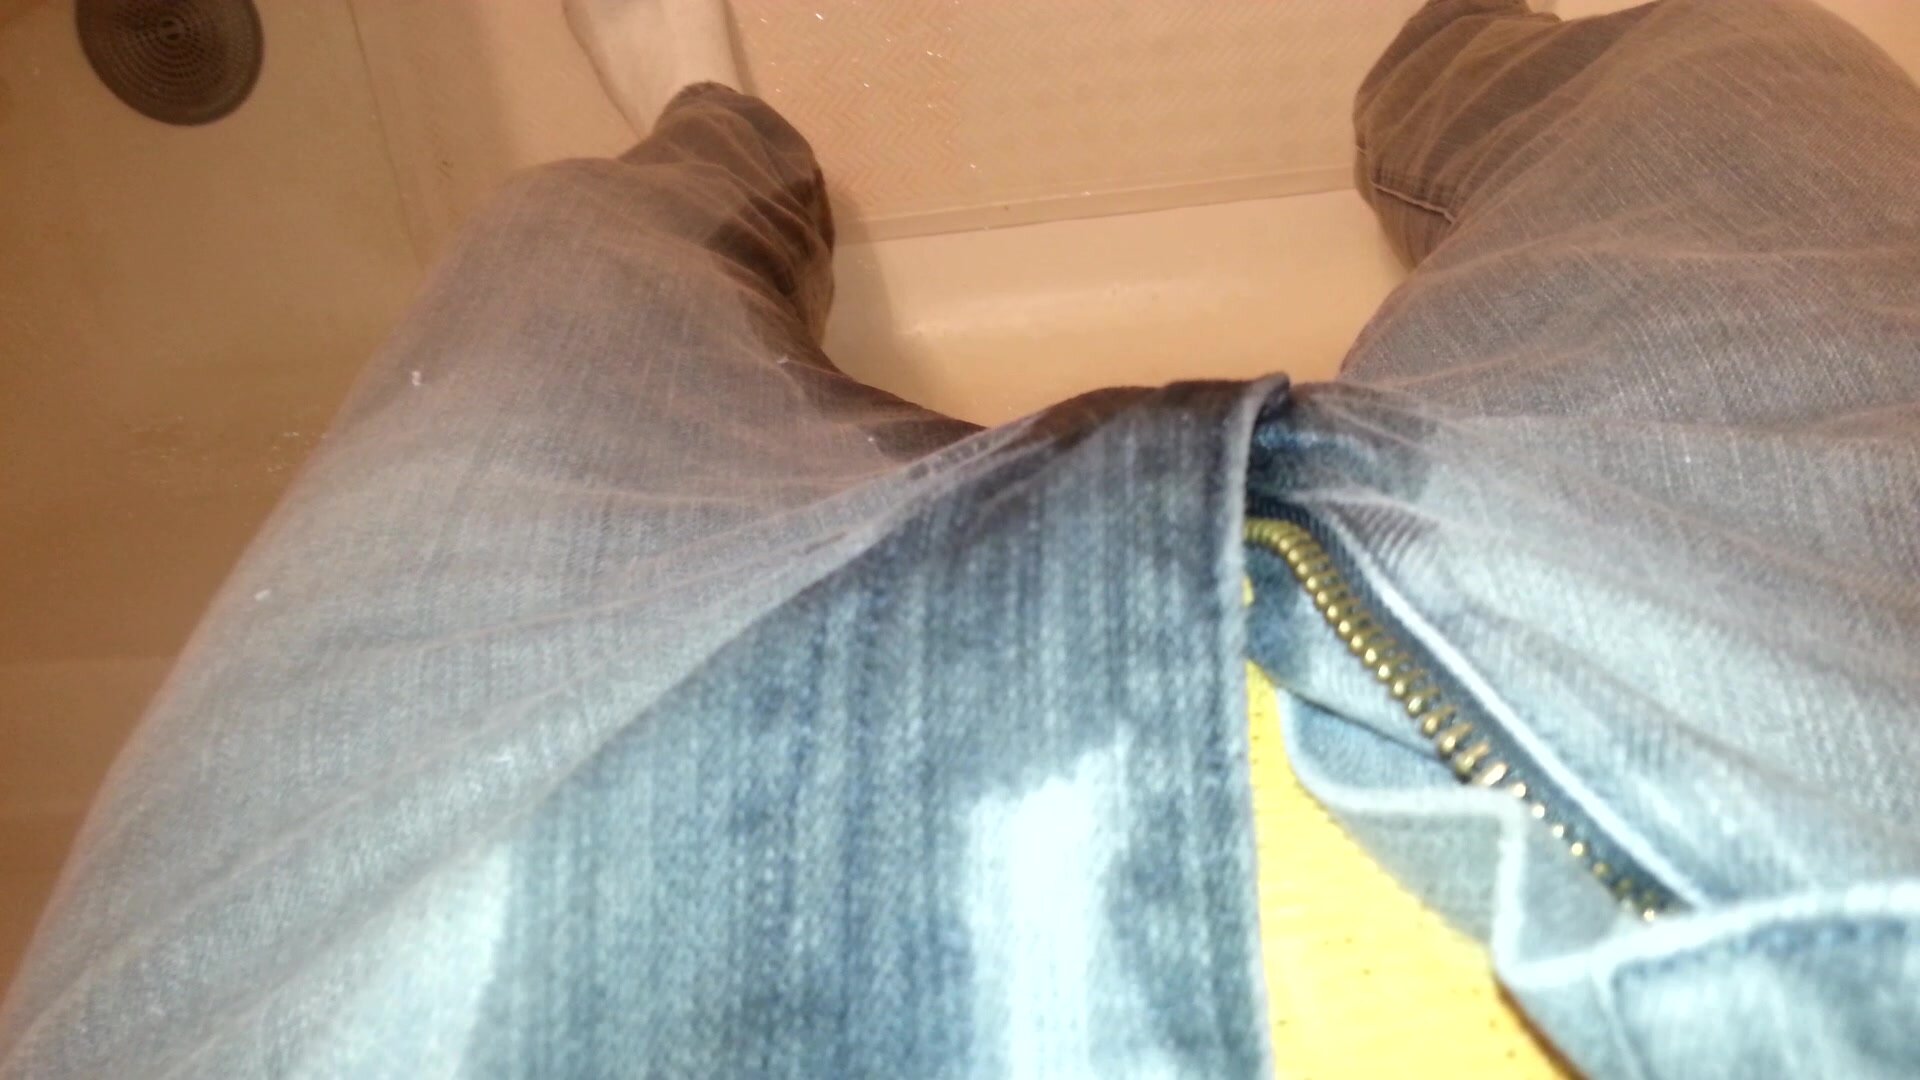 I pissed my yellow jock and jeans!